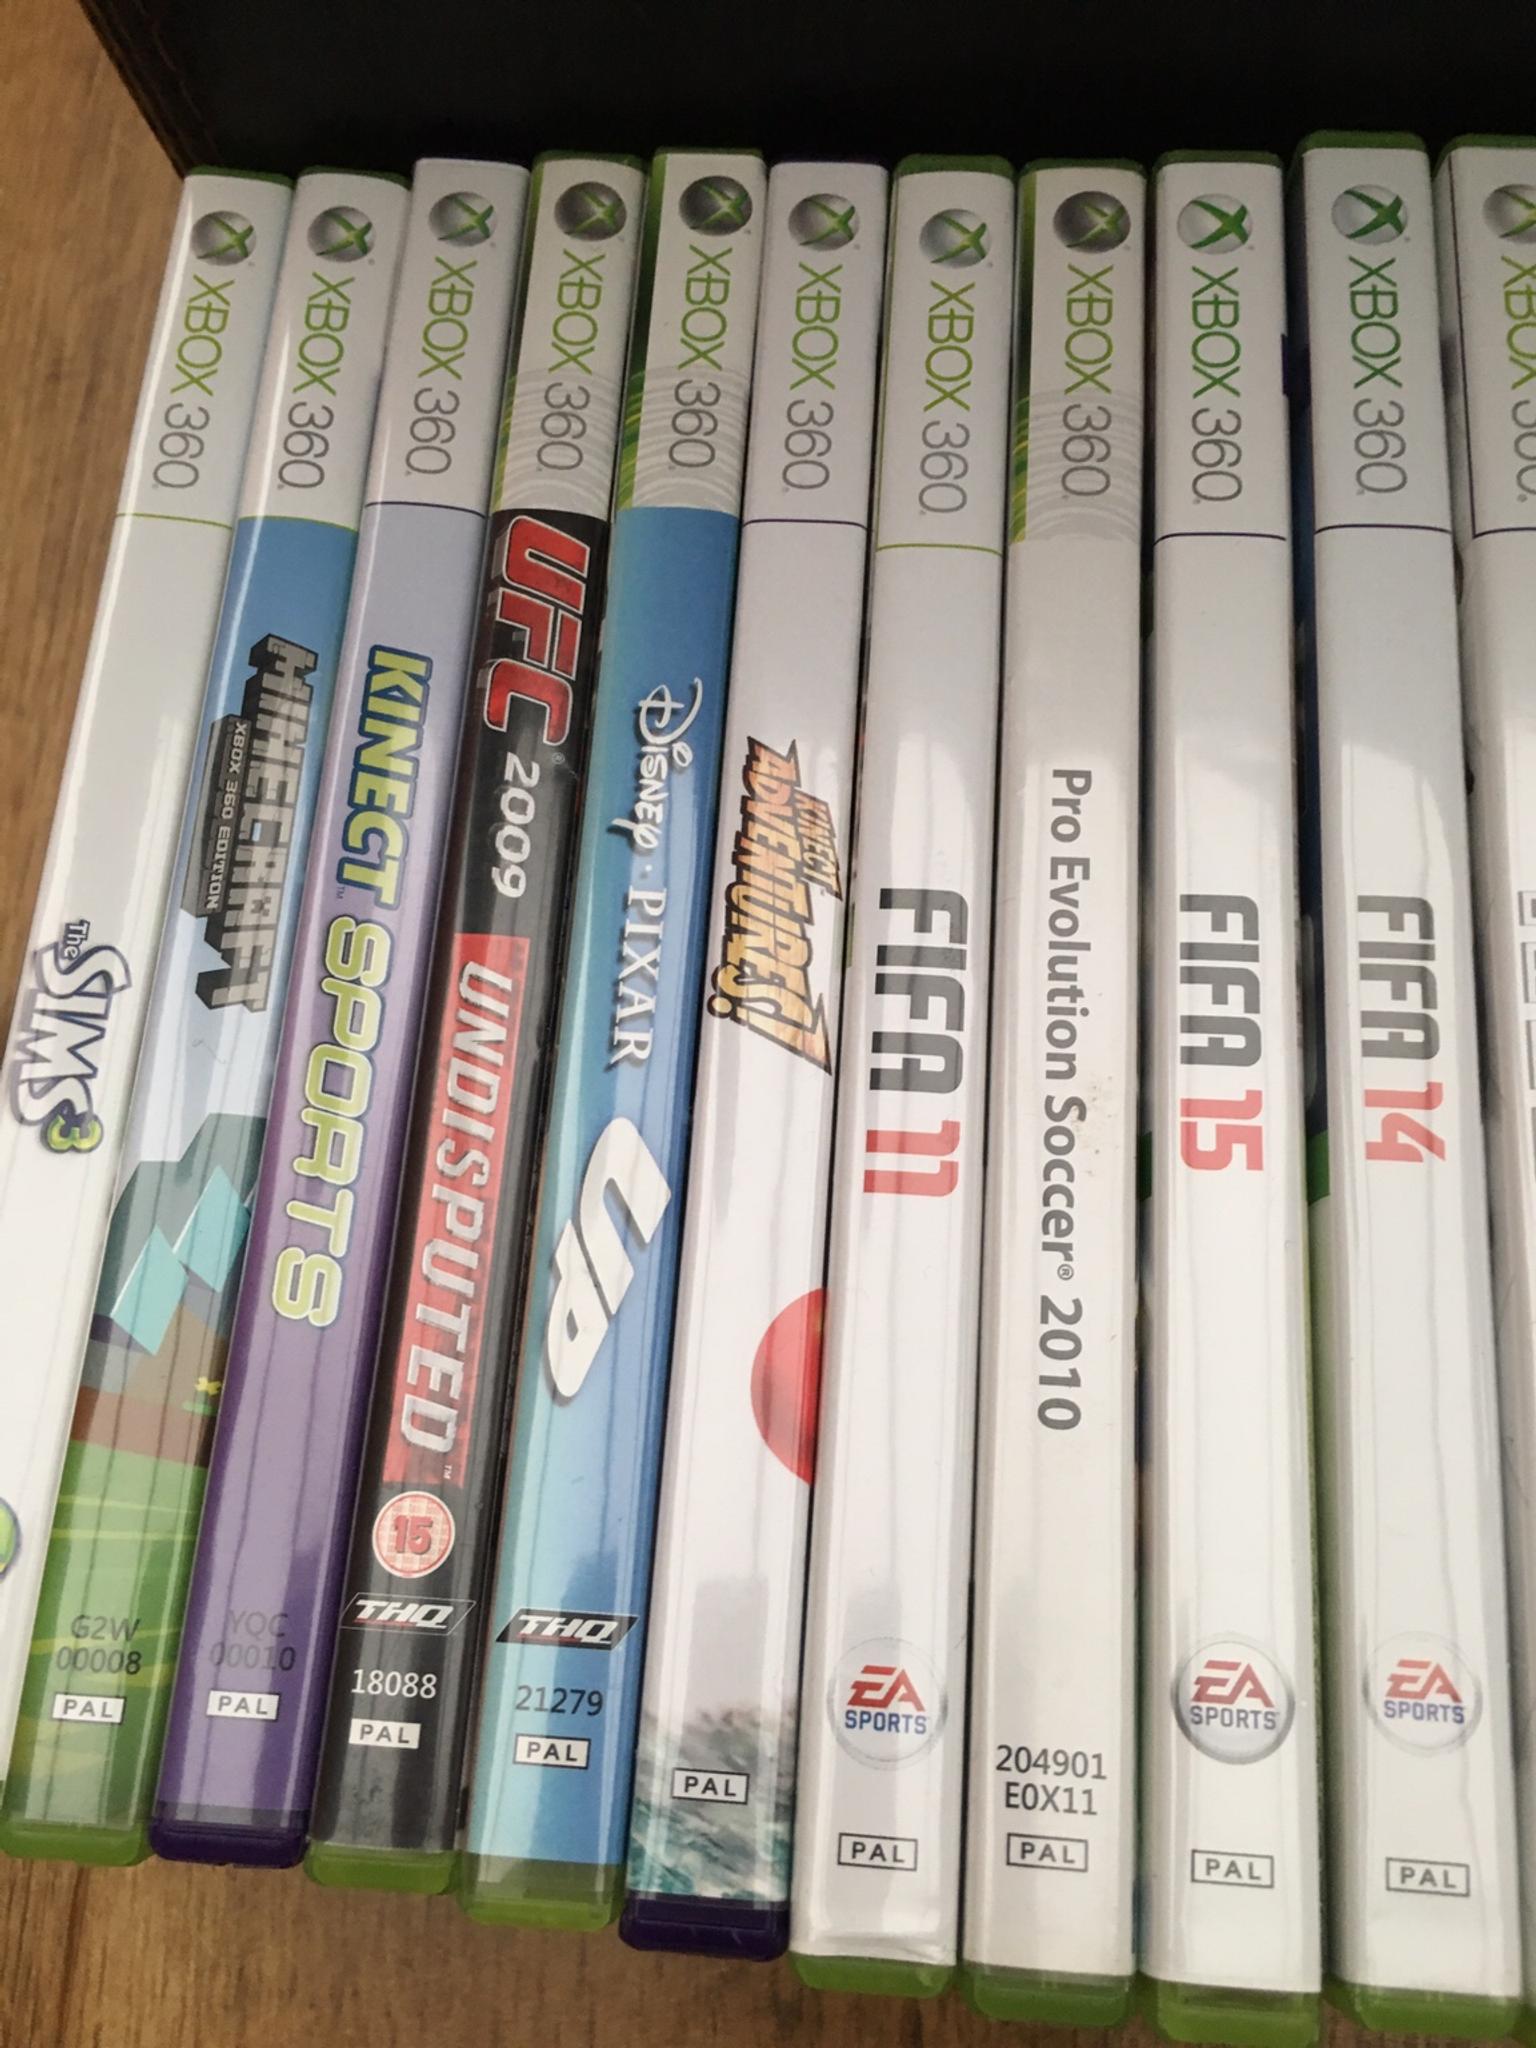 Xbox 360 With Kinect Headset And 28 Games In Doncaster Fur 50 00